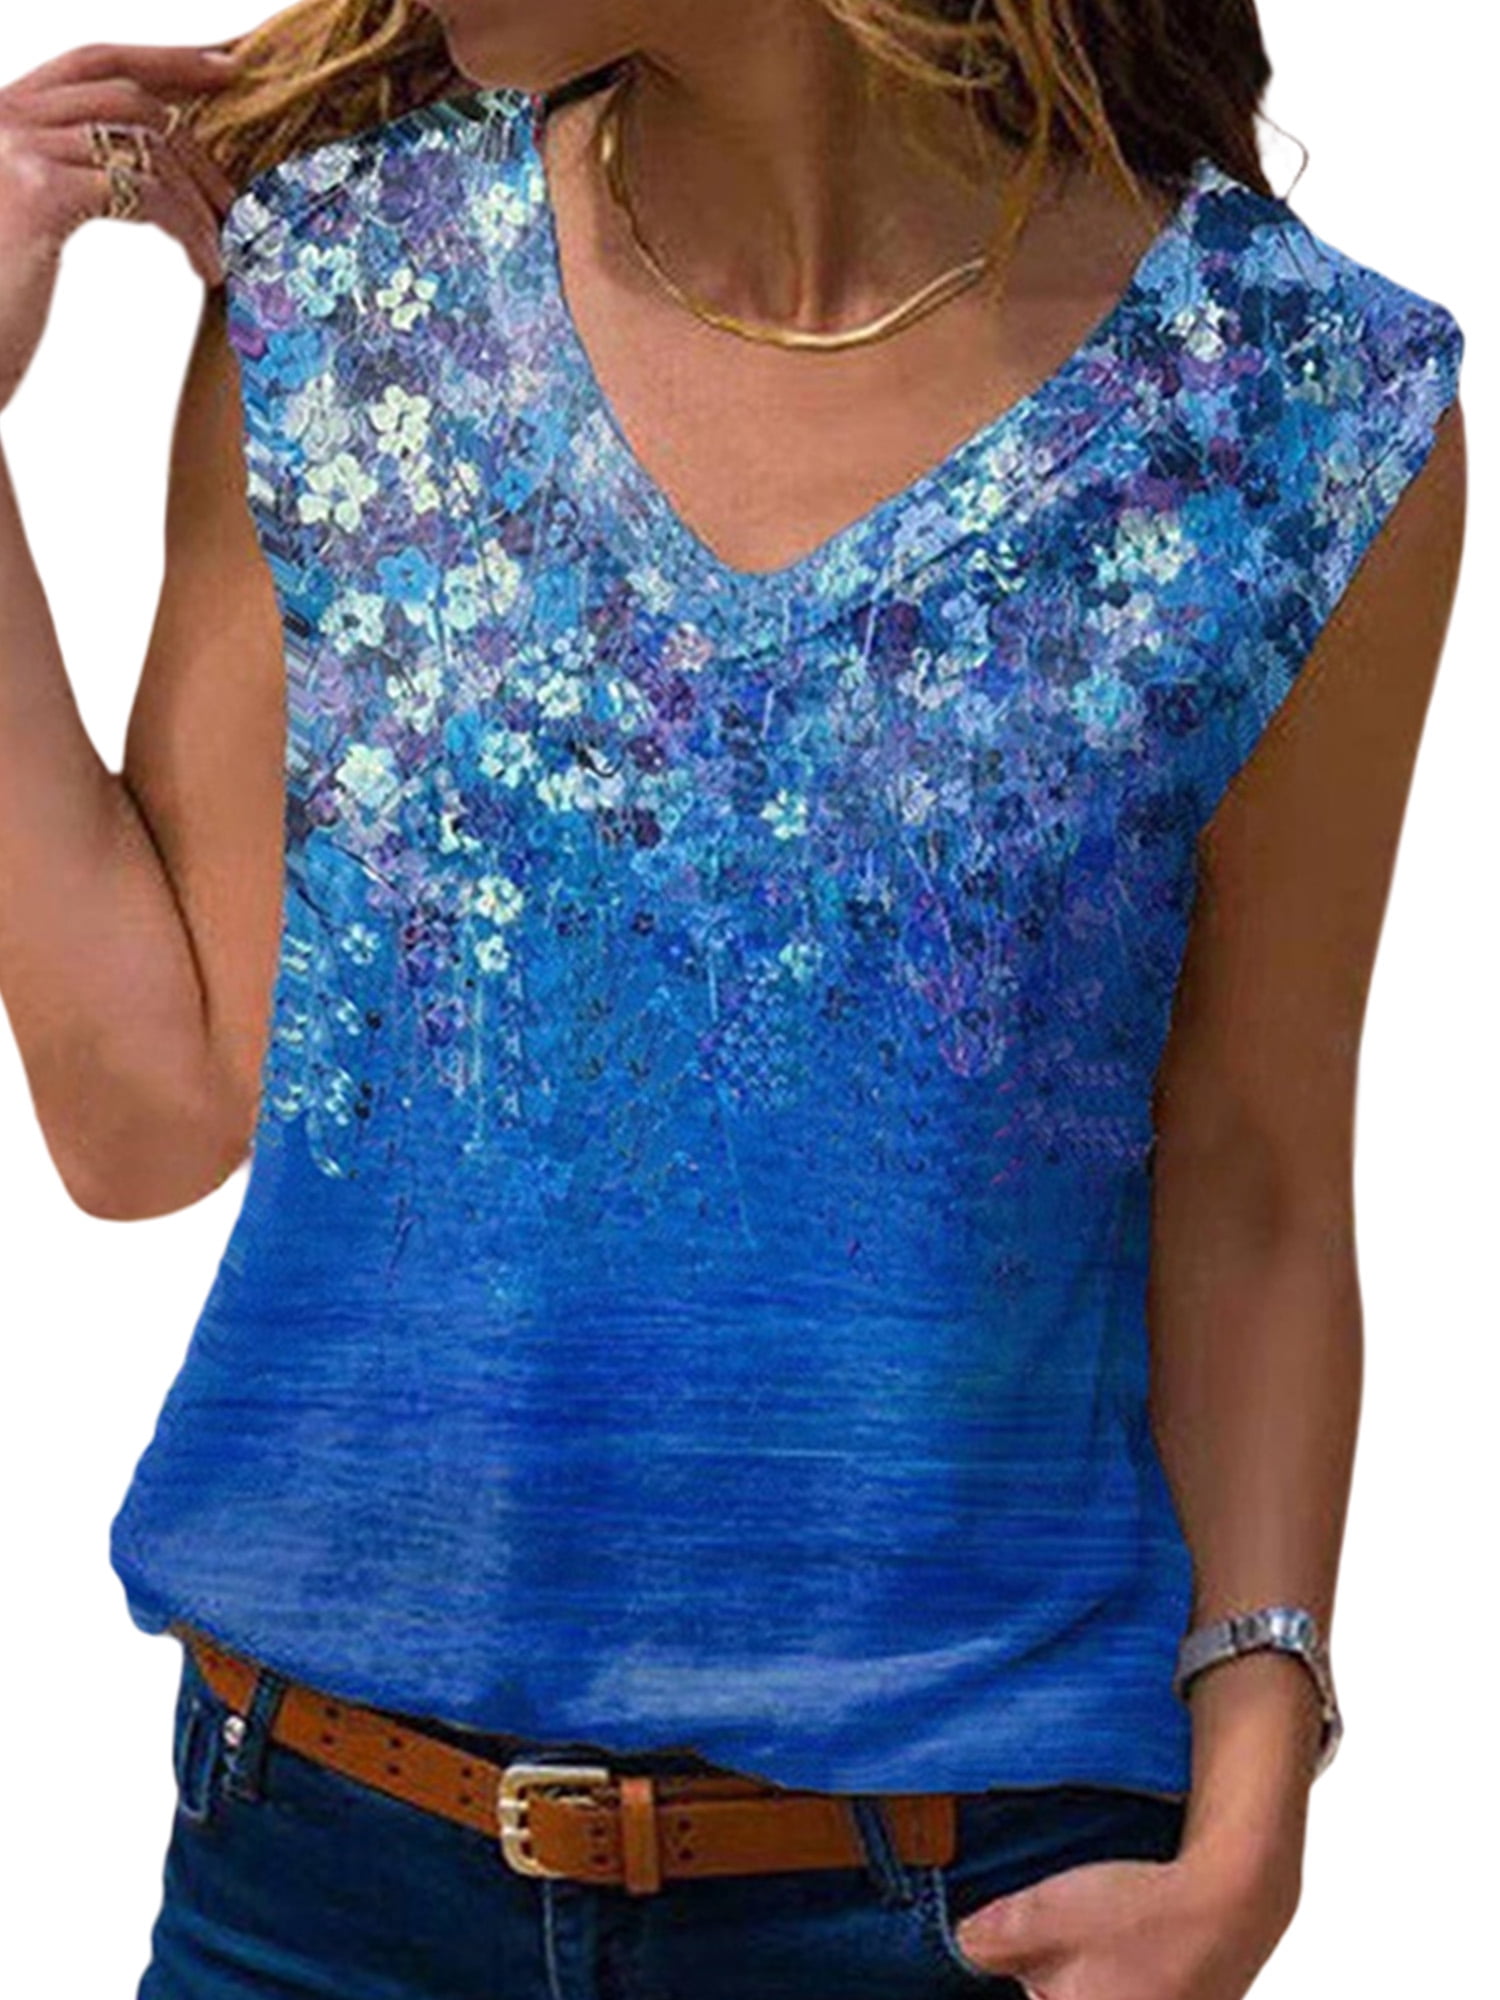 S-3XL Loose Floral Printed Beach Sleeveless Tops for Women Lounge Tank ...